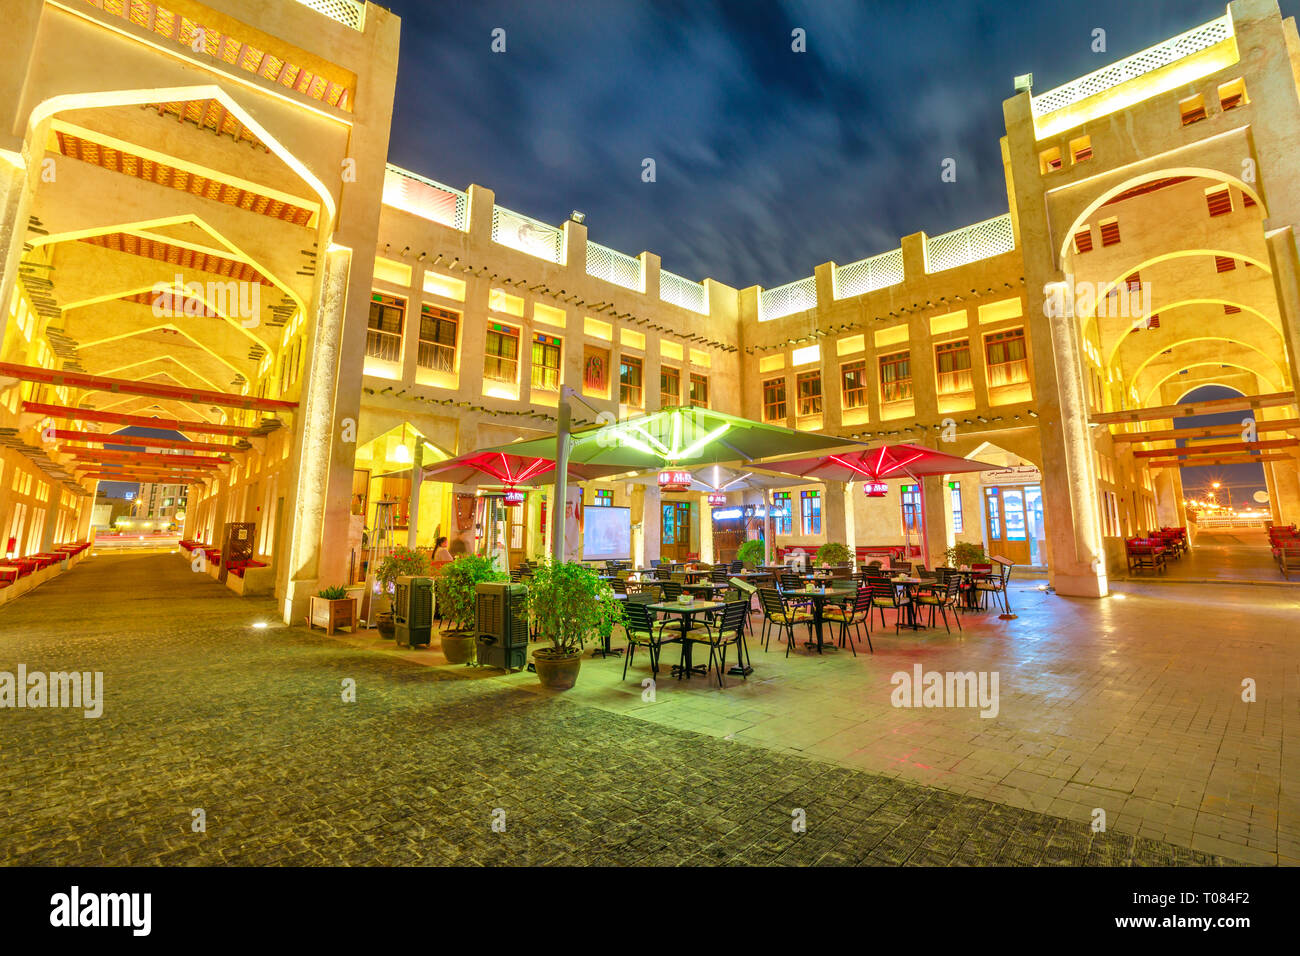 Doha, Qatar - February 18, 2019: historic building of Falcon Souq, a market selling live falcon birds and falconry equipment located in the center of Stock Photo